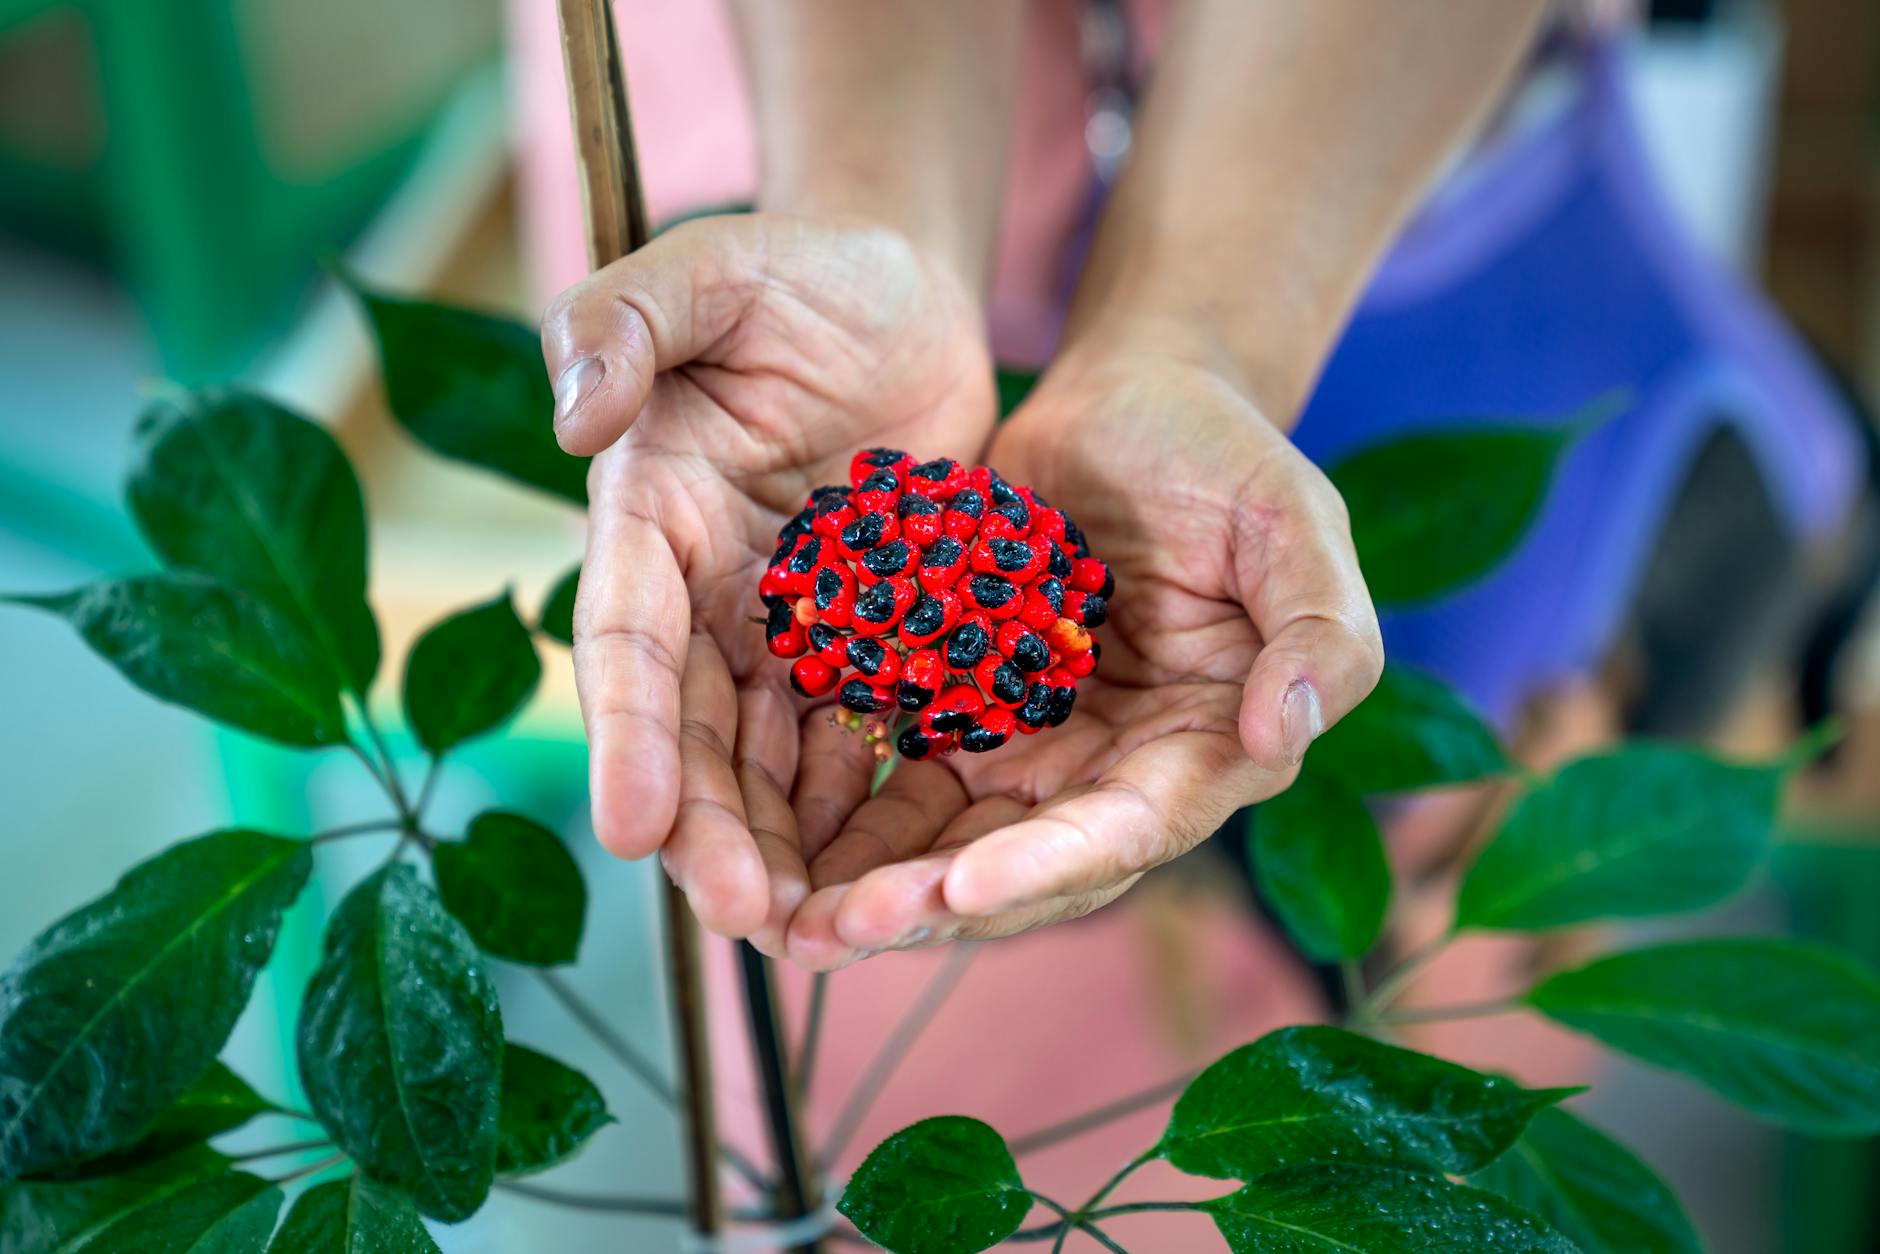 Hands of a Person Holding a Cluster of Red and Black Seeds